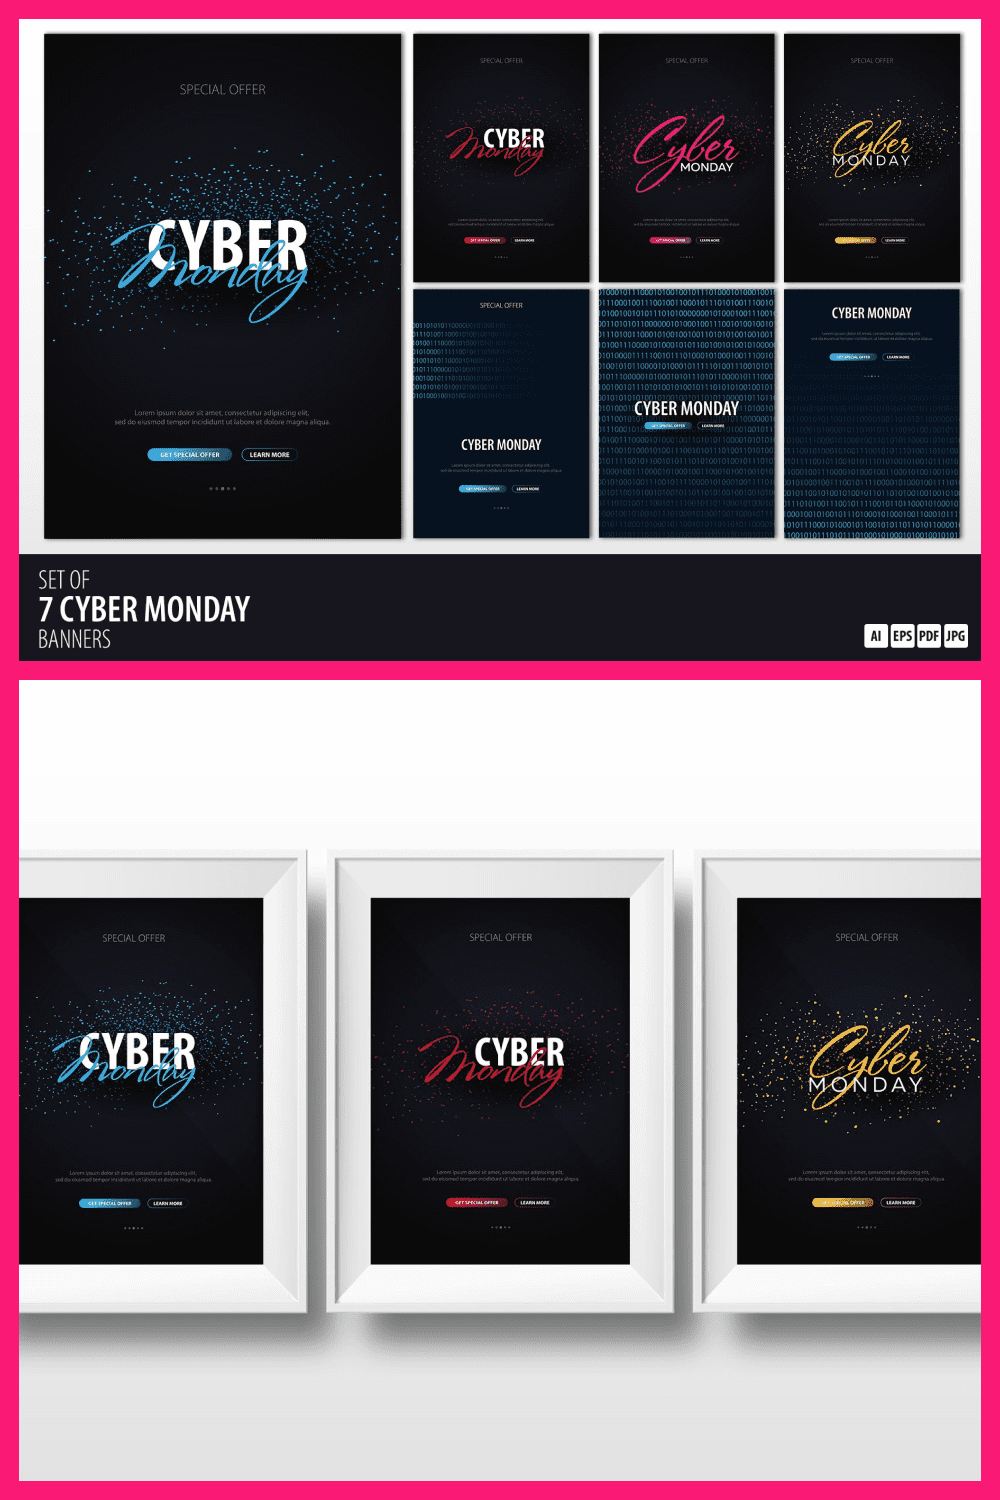 Cyber Monday Banners with Dark Blue Background, Bold White Letter, Colorful Think Handwriting.